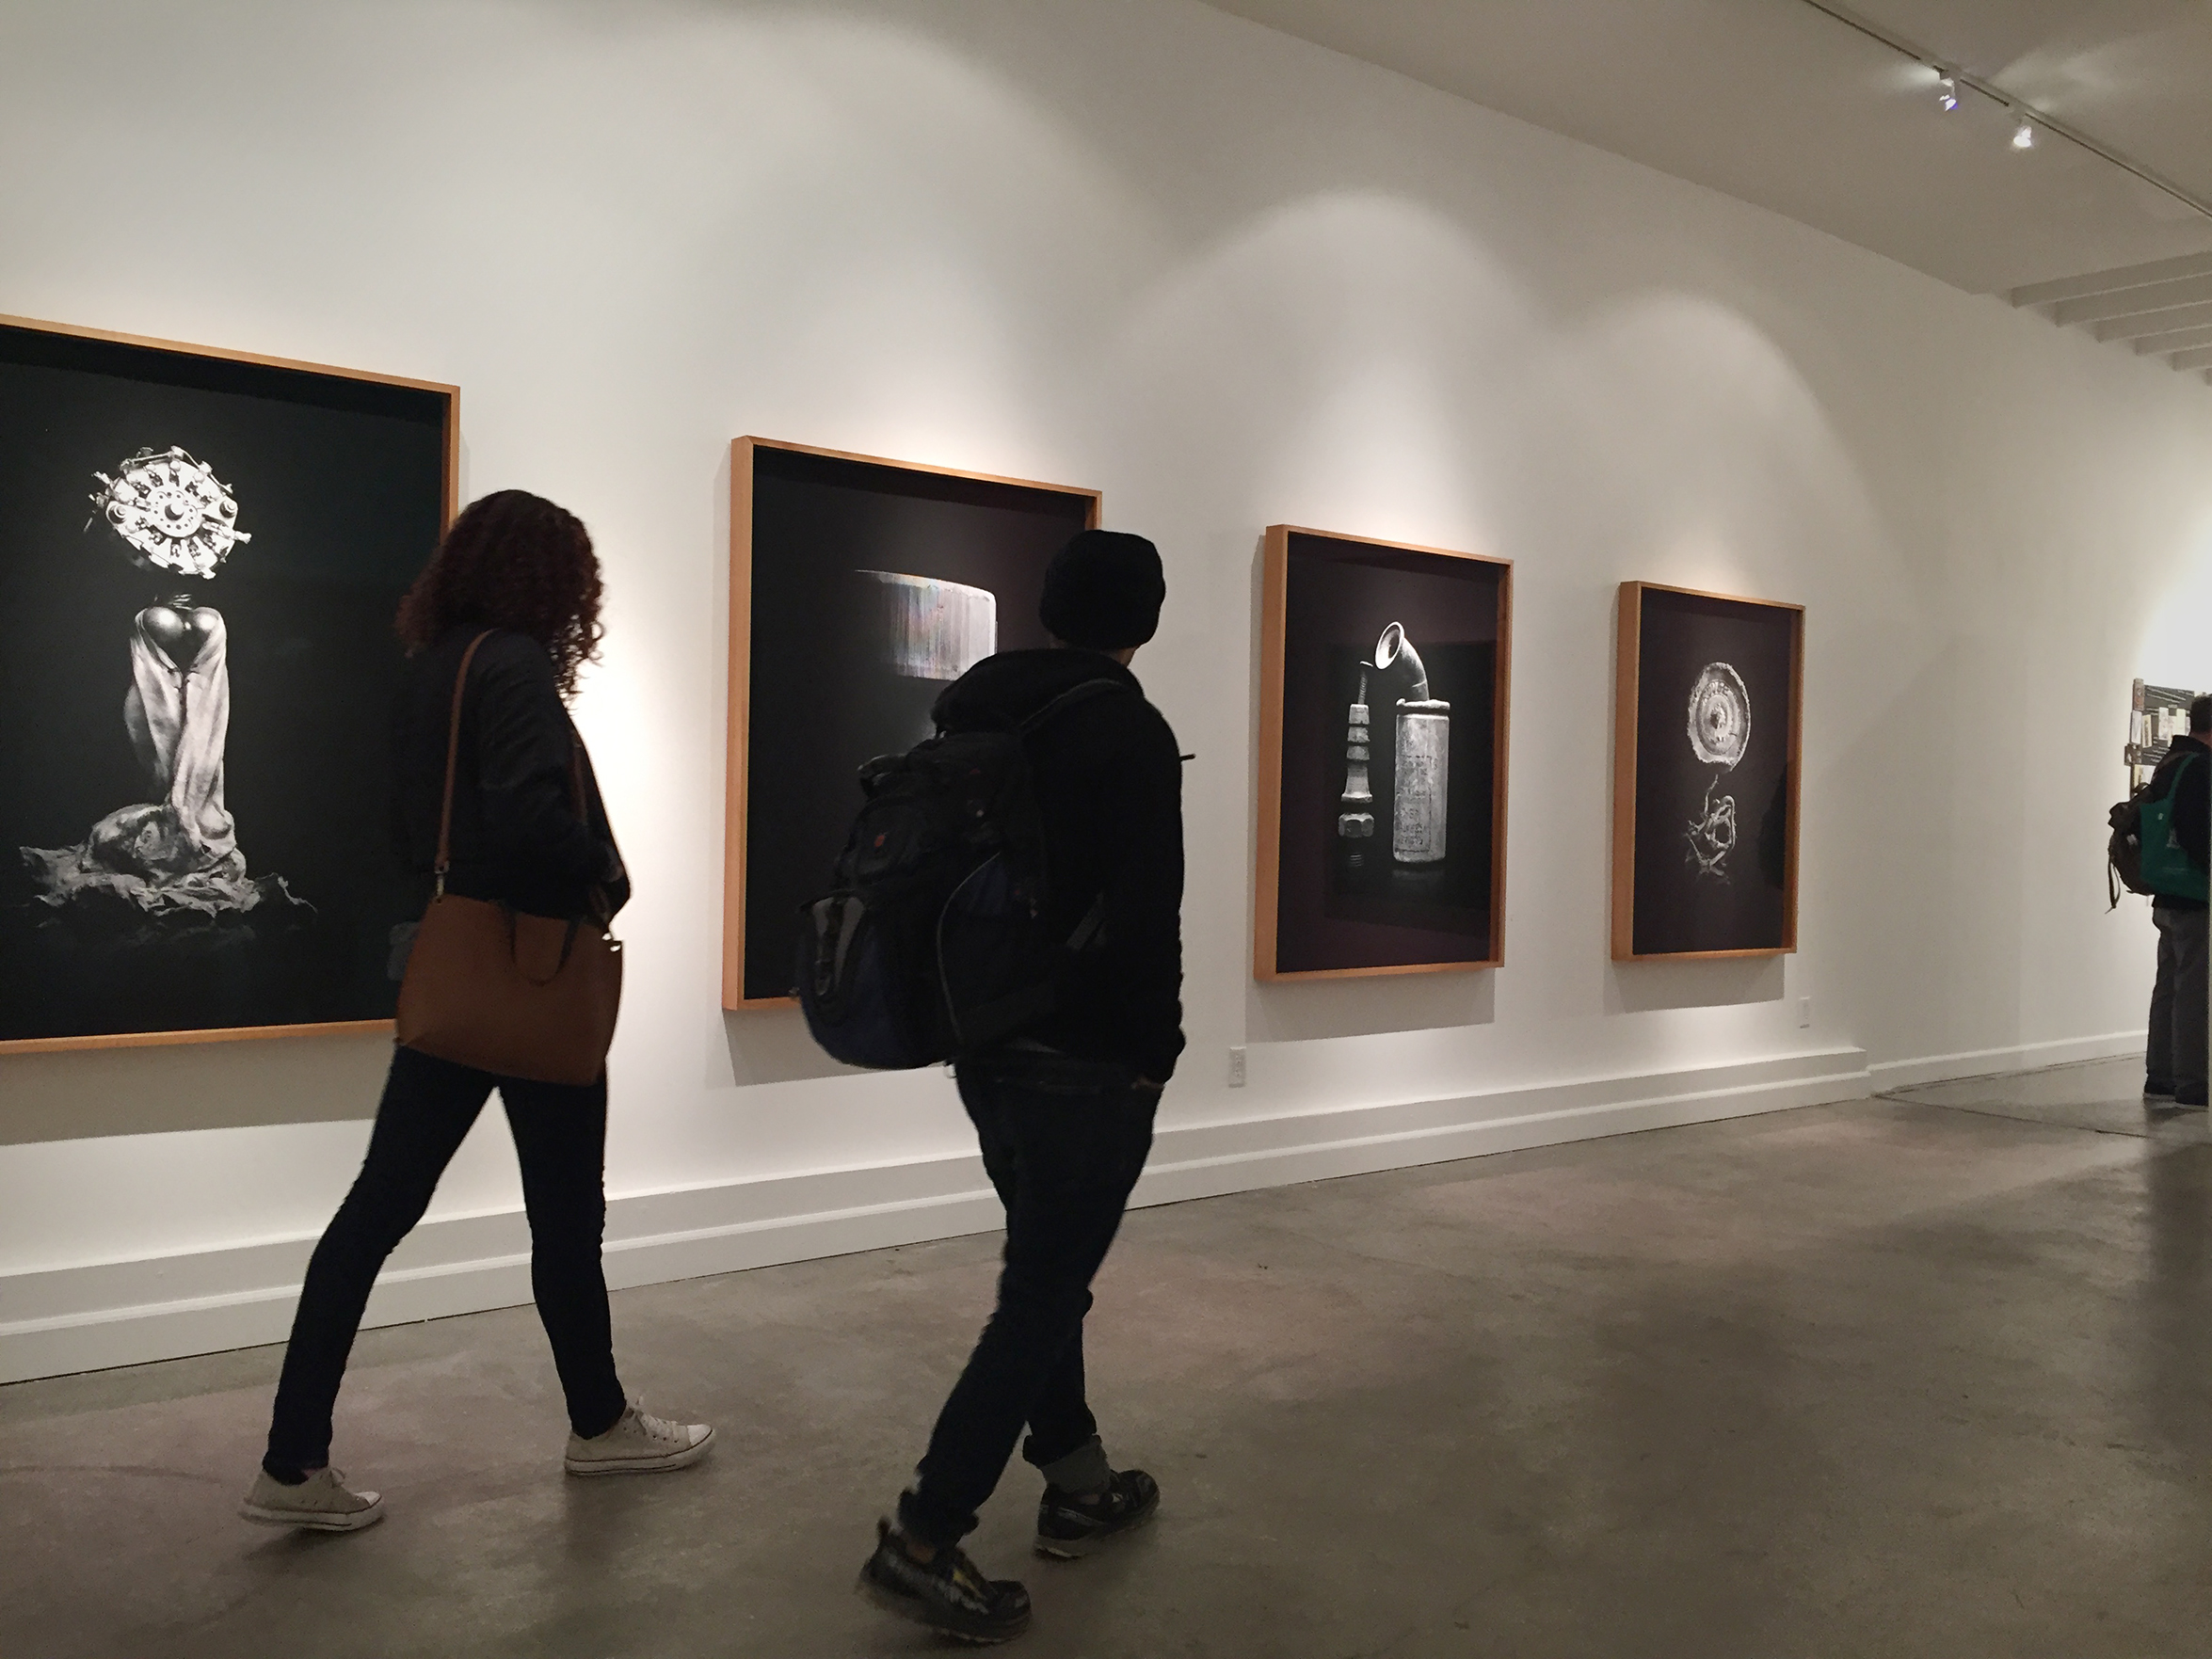 two figures walk in front of a series of black and white paintings.